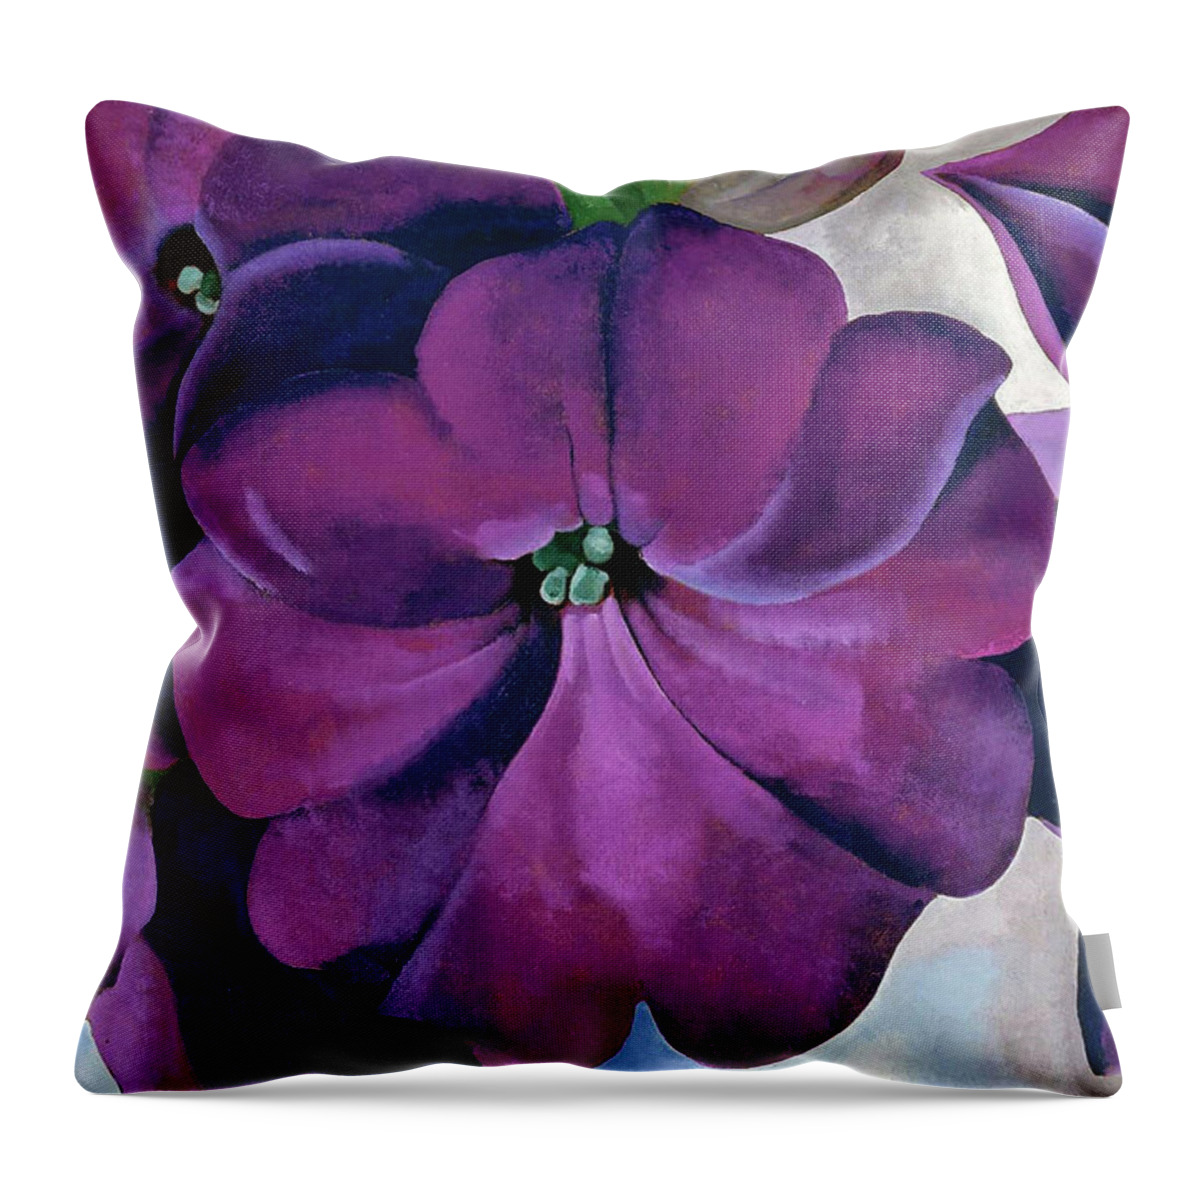 Georgia O'keeffe Throw Pillow featuring the painting Petunias - Modernist purple flower painting by Georgia O'Keeffe